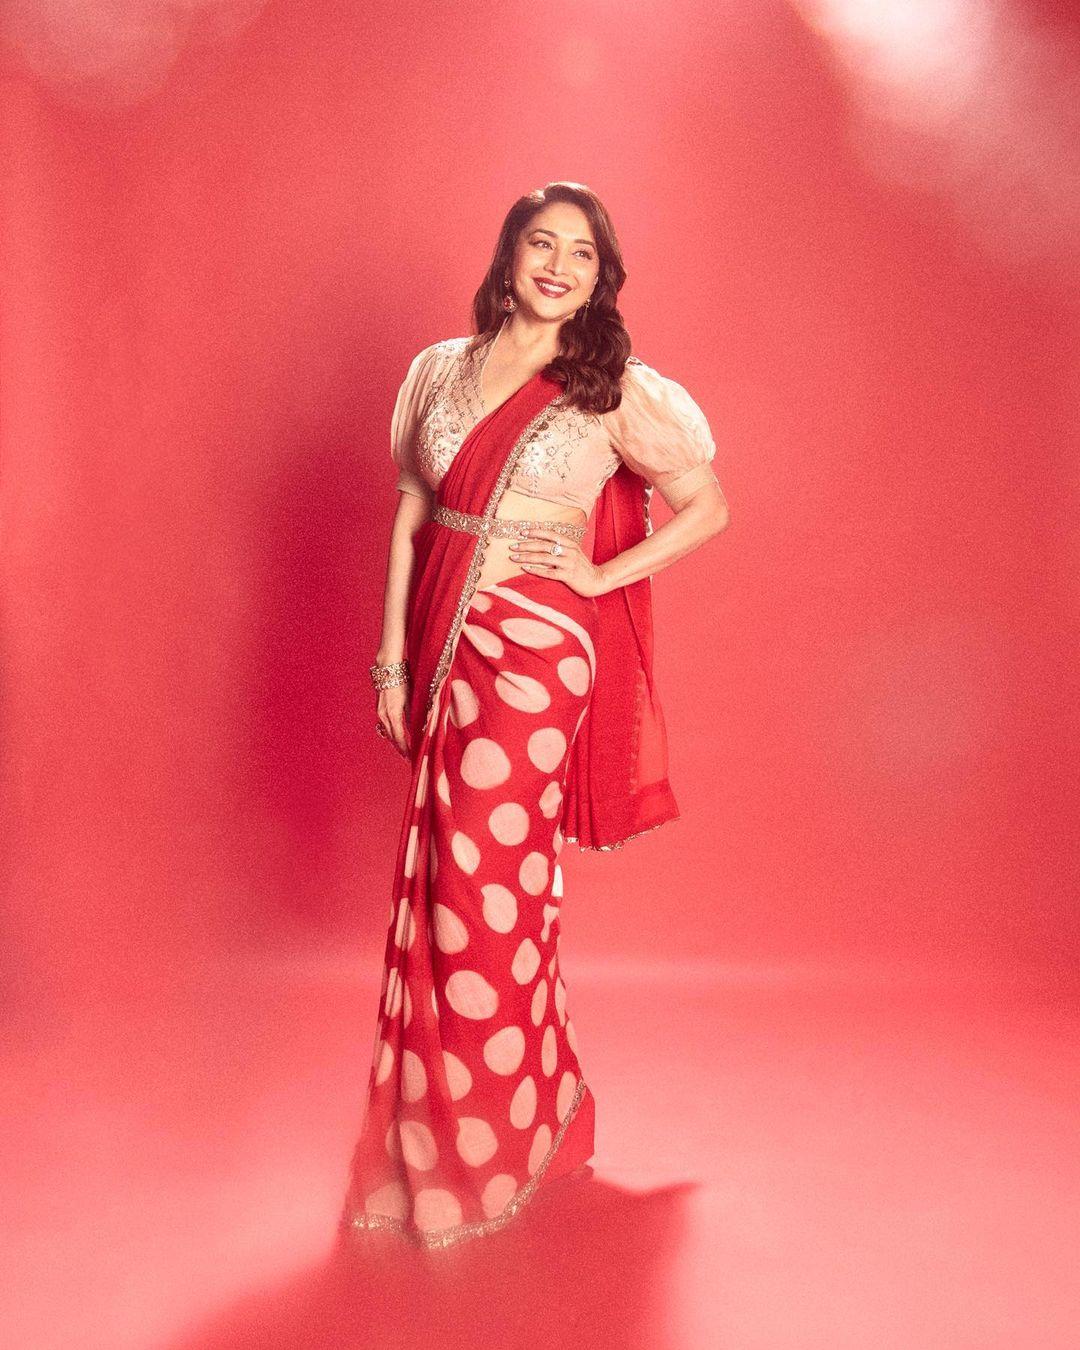 Madhuri Dixit's outfit for Diwali is a stunning red and gold polka dot saree that beautifully captures the essence of elegance and is a perfect pick for the occasion. The breezy drape of the saree strikes a harmonious balance between chic and stylish